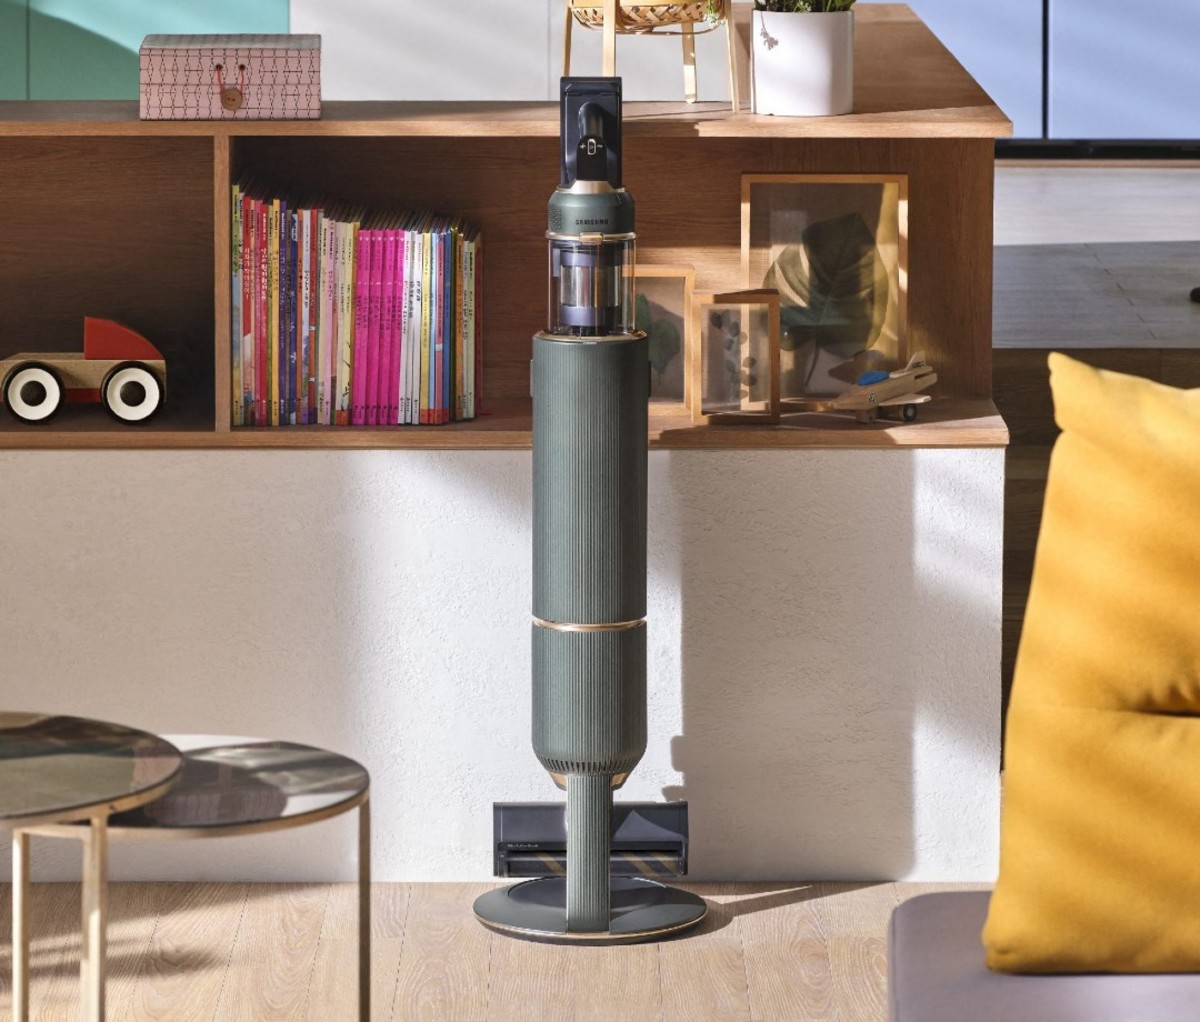 Bespoke Jet cordless stick vacuum with all-in-one Clean Station in Woody Green.